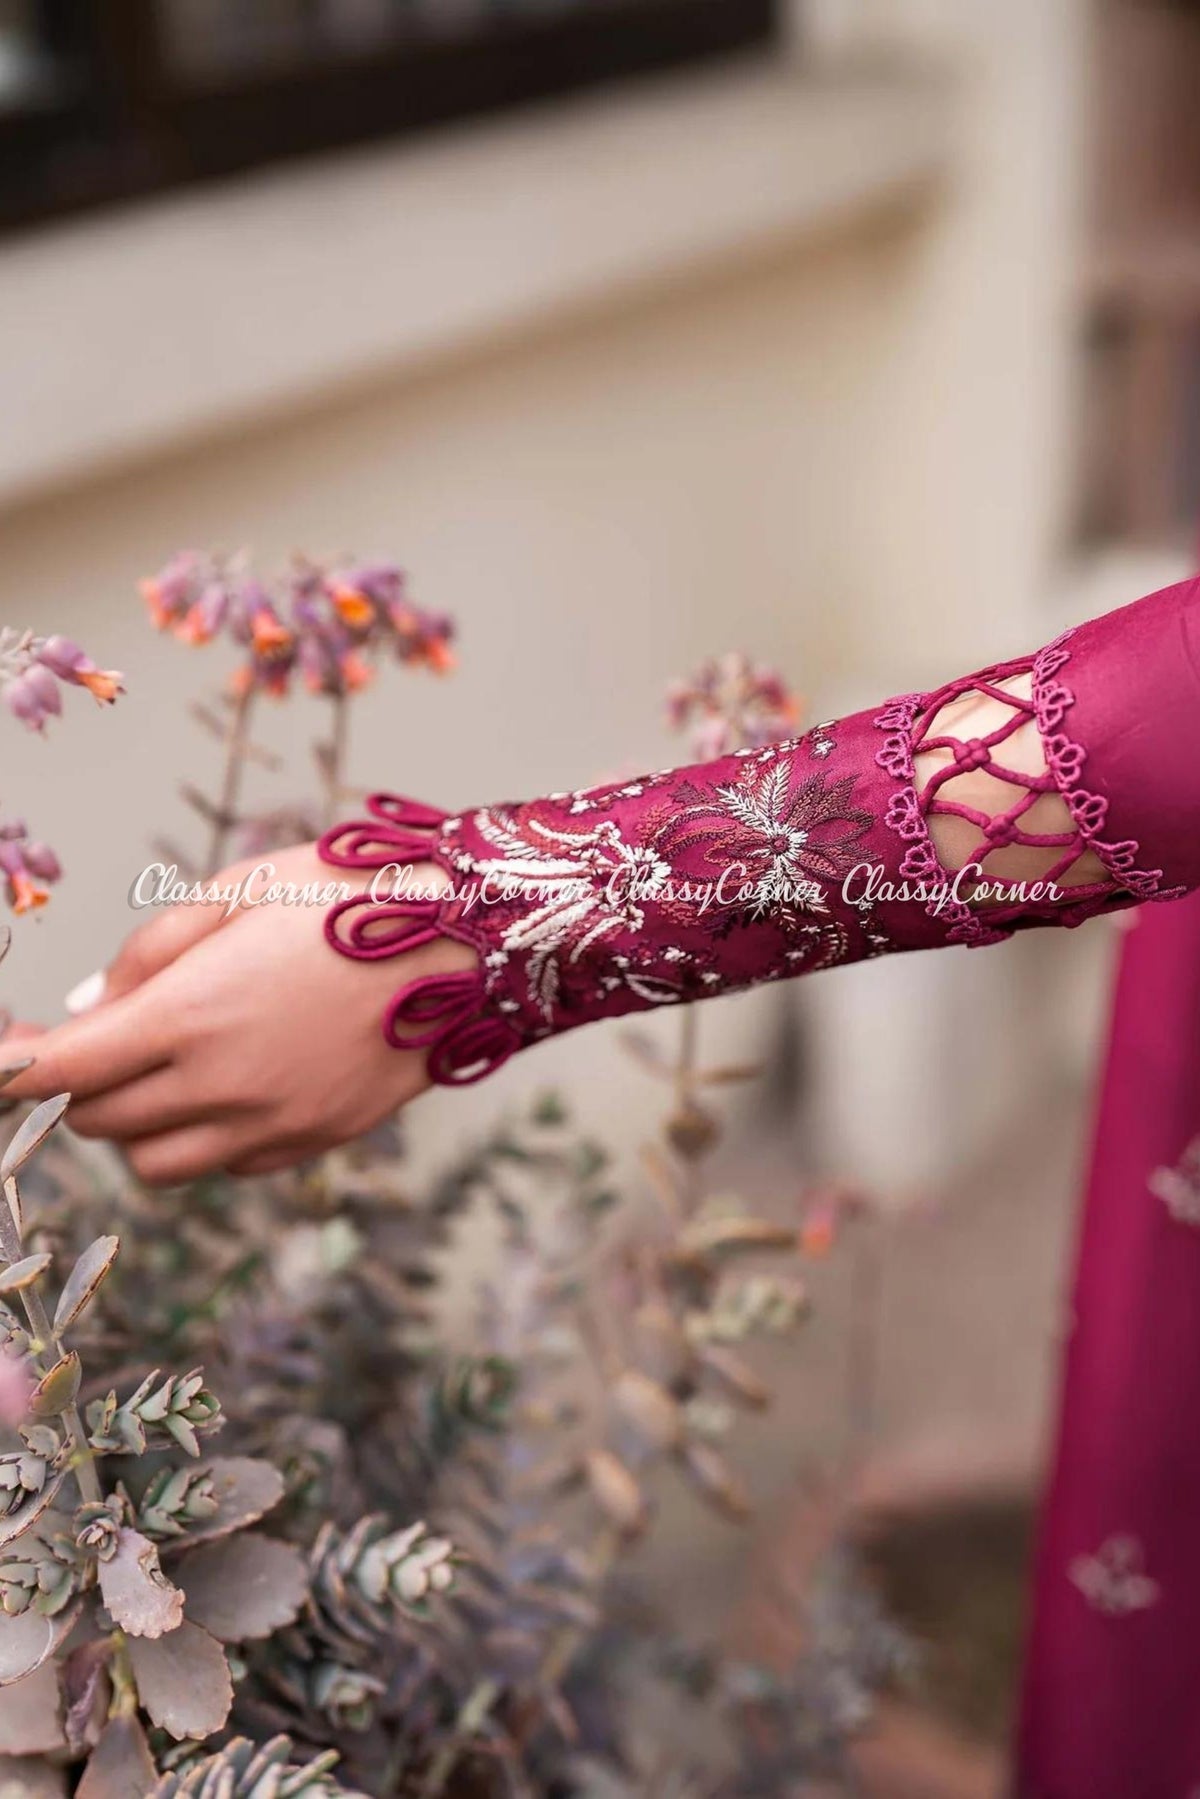 Plum Lawn Embroidered Formal Wear Suit